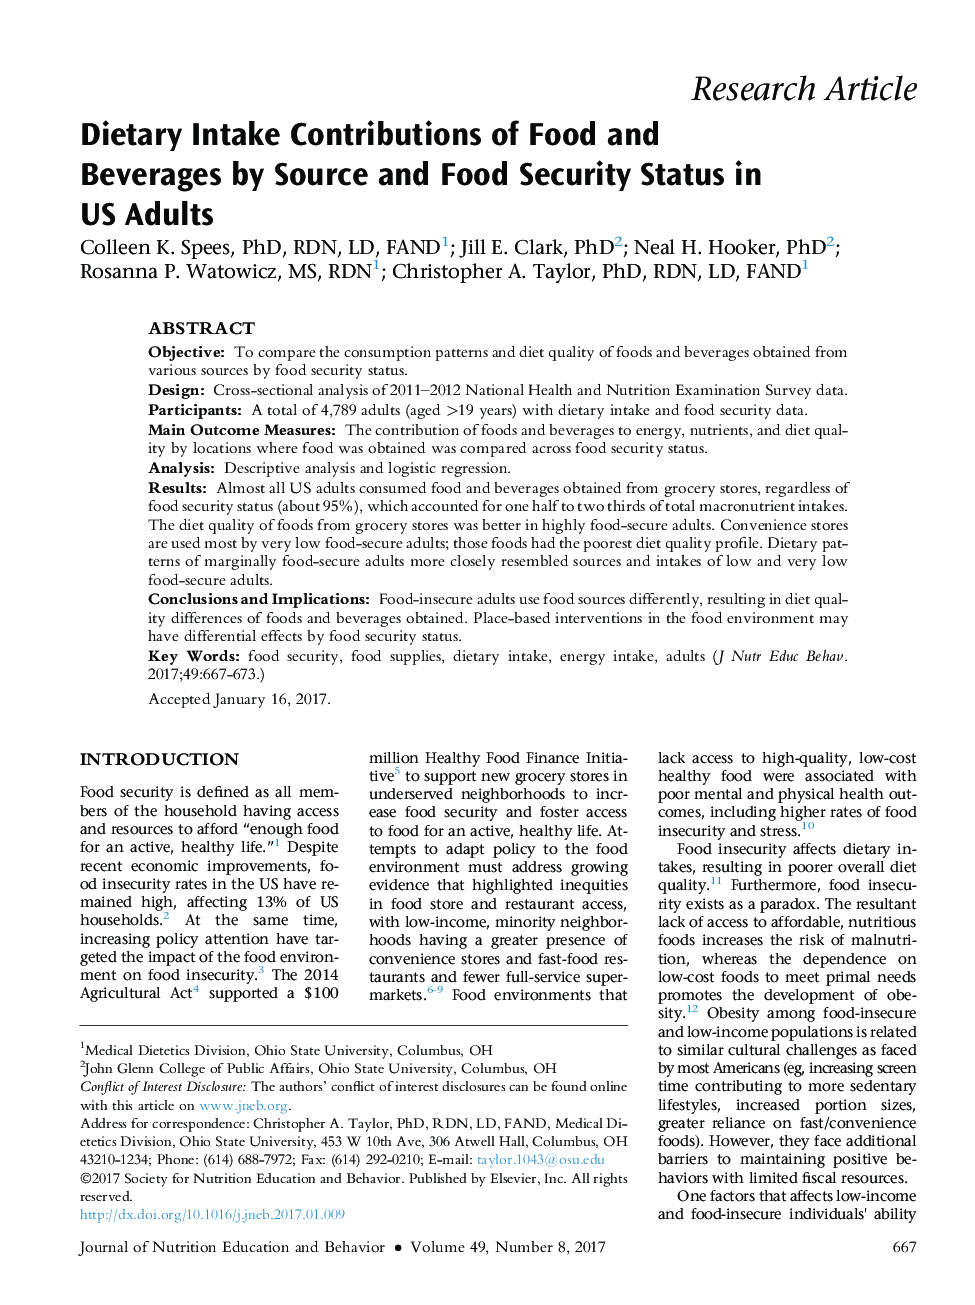 Dietary Intake Contributions of Food and Beverages by Source and Food Security Status in US Adults